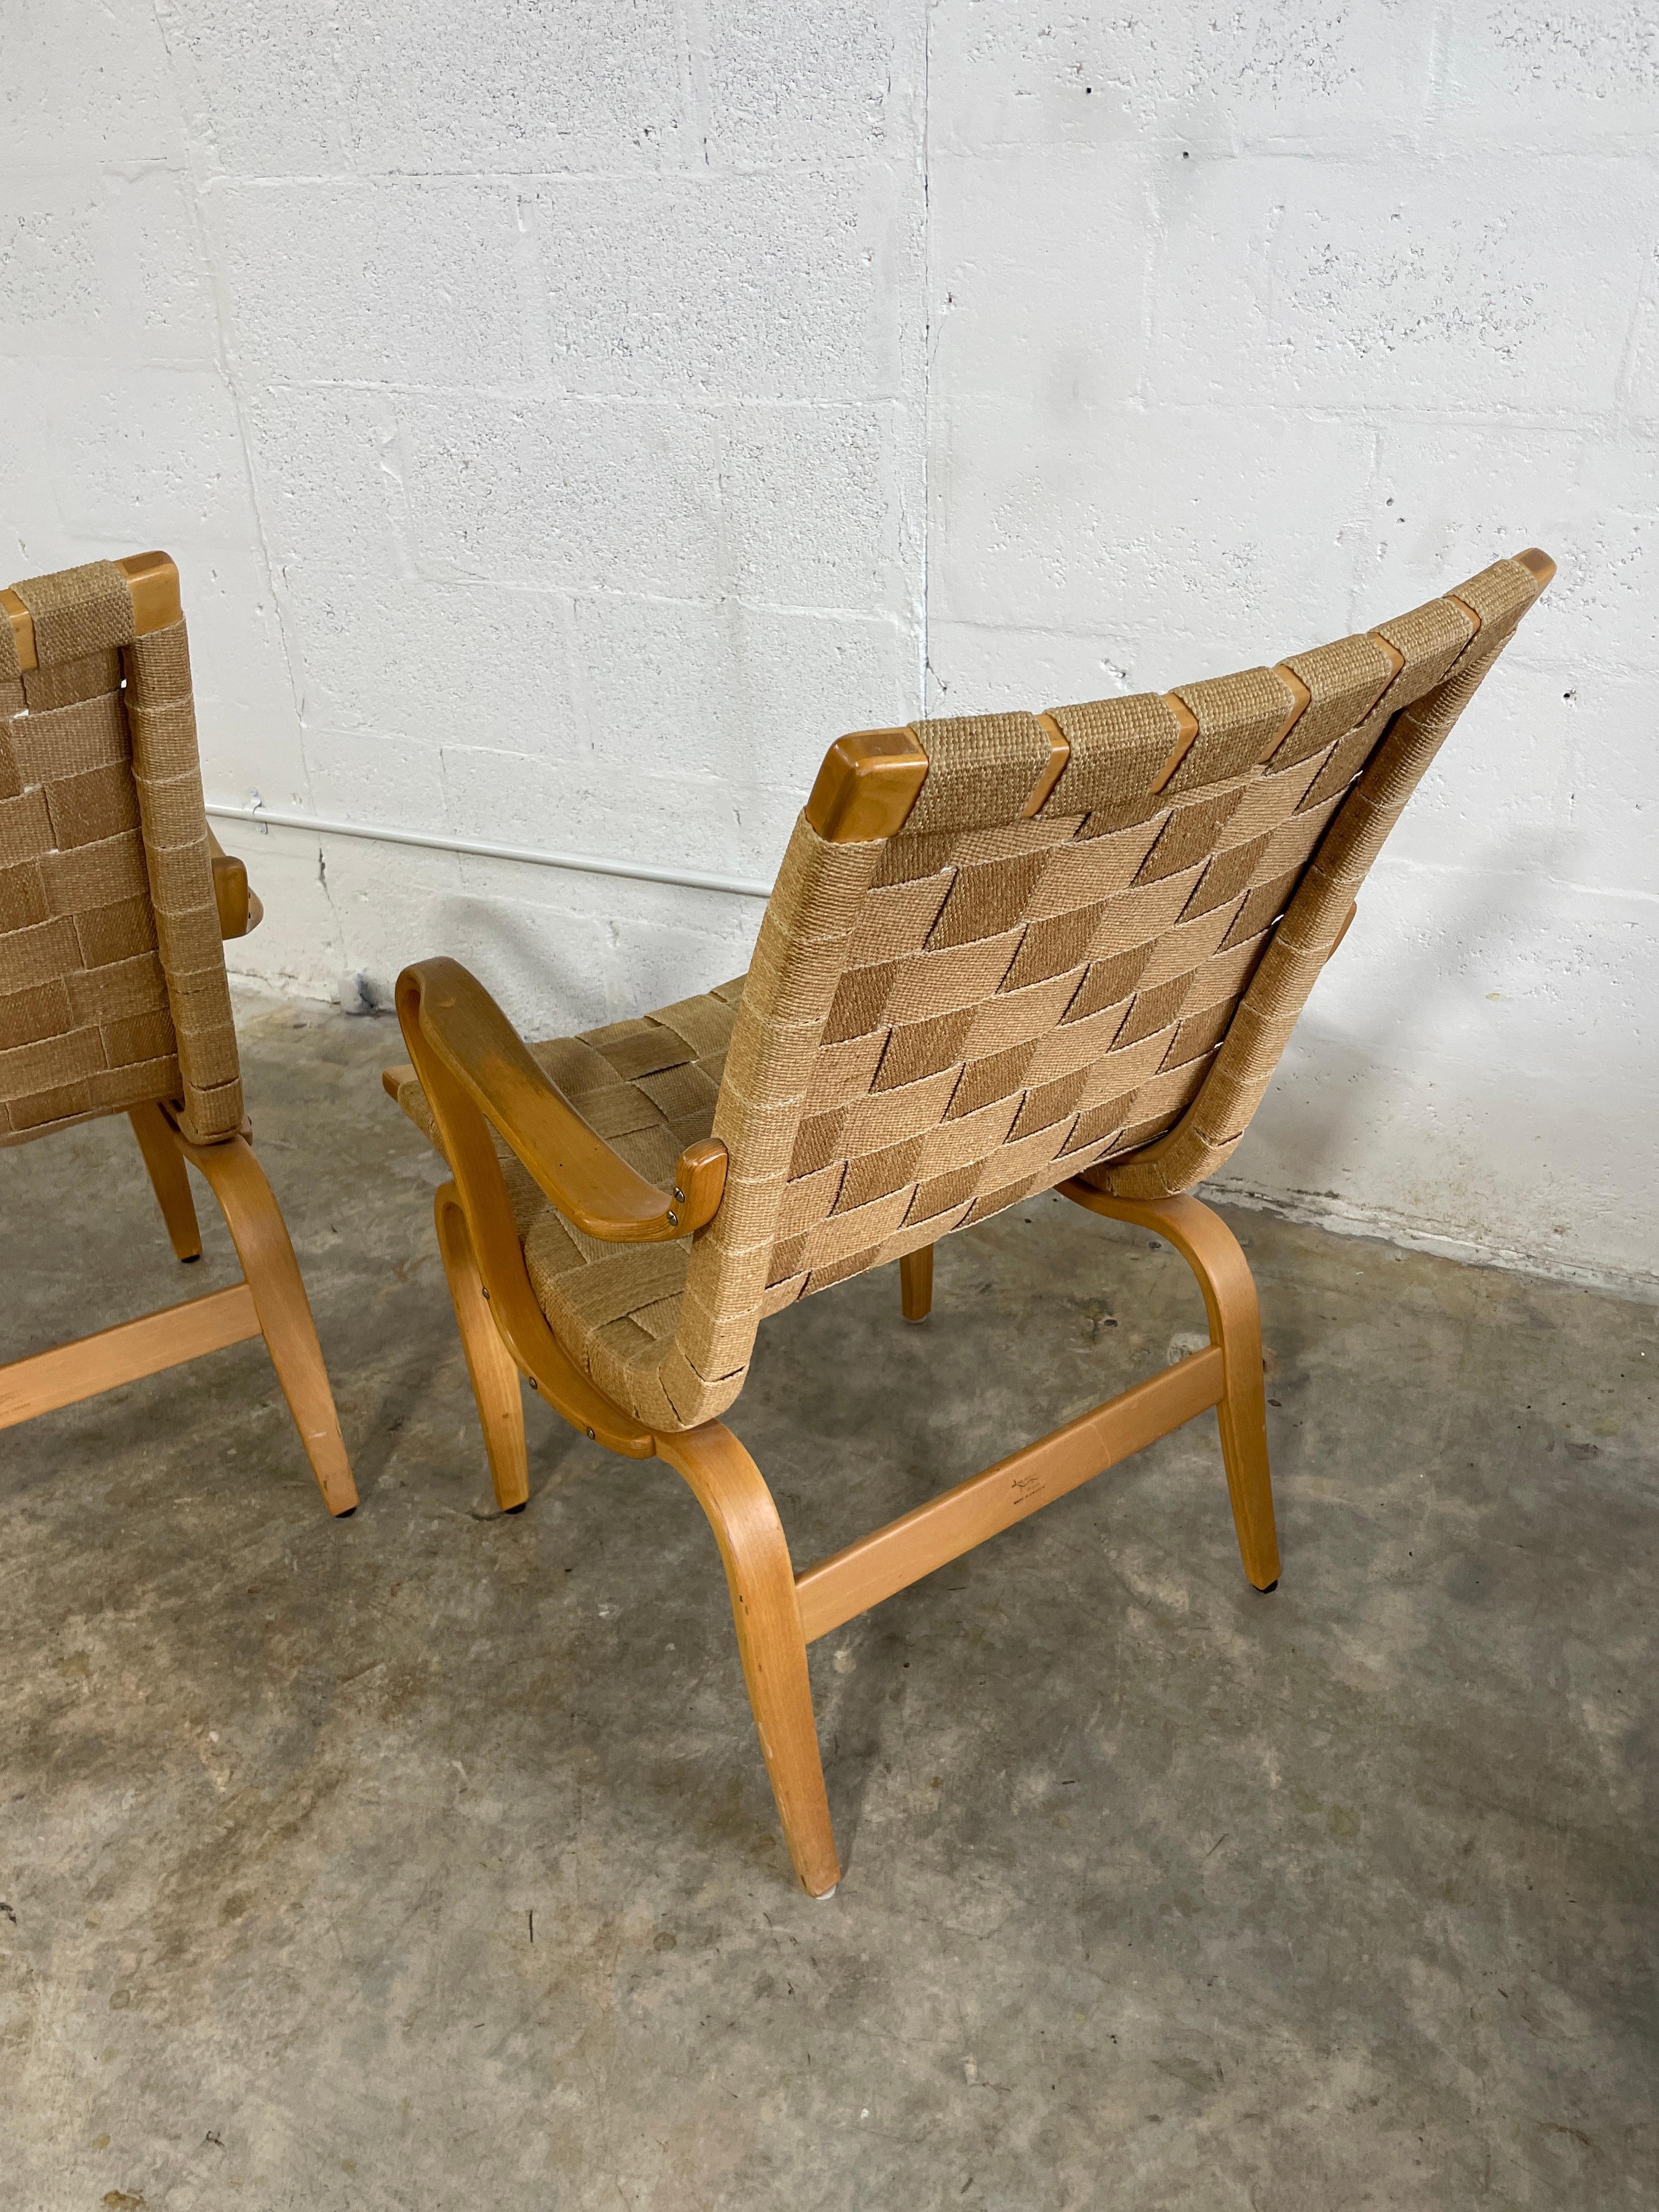 Pair of Bruno Mathsson “Eva” Chairs. Original canvas straps. Labeled. Made in Sweden.